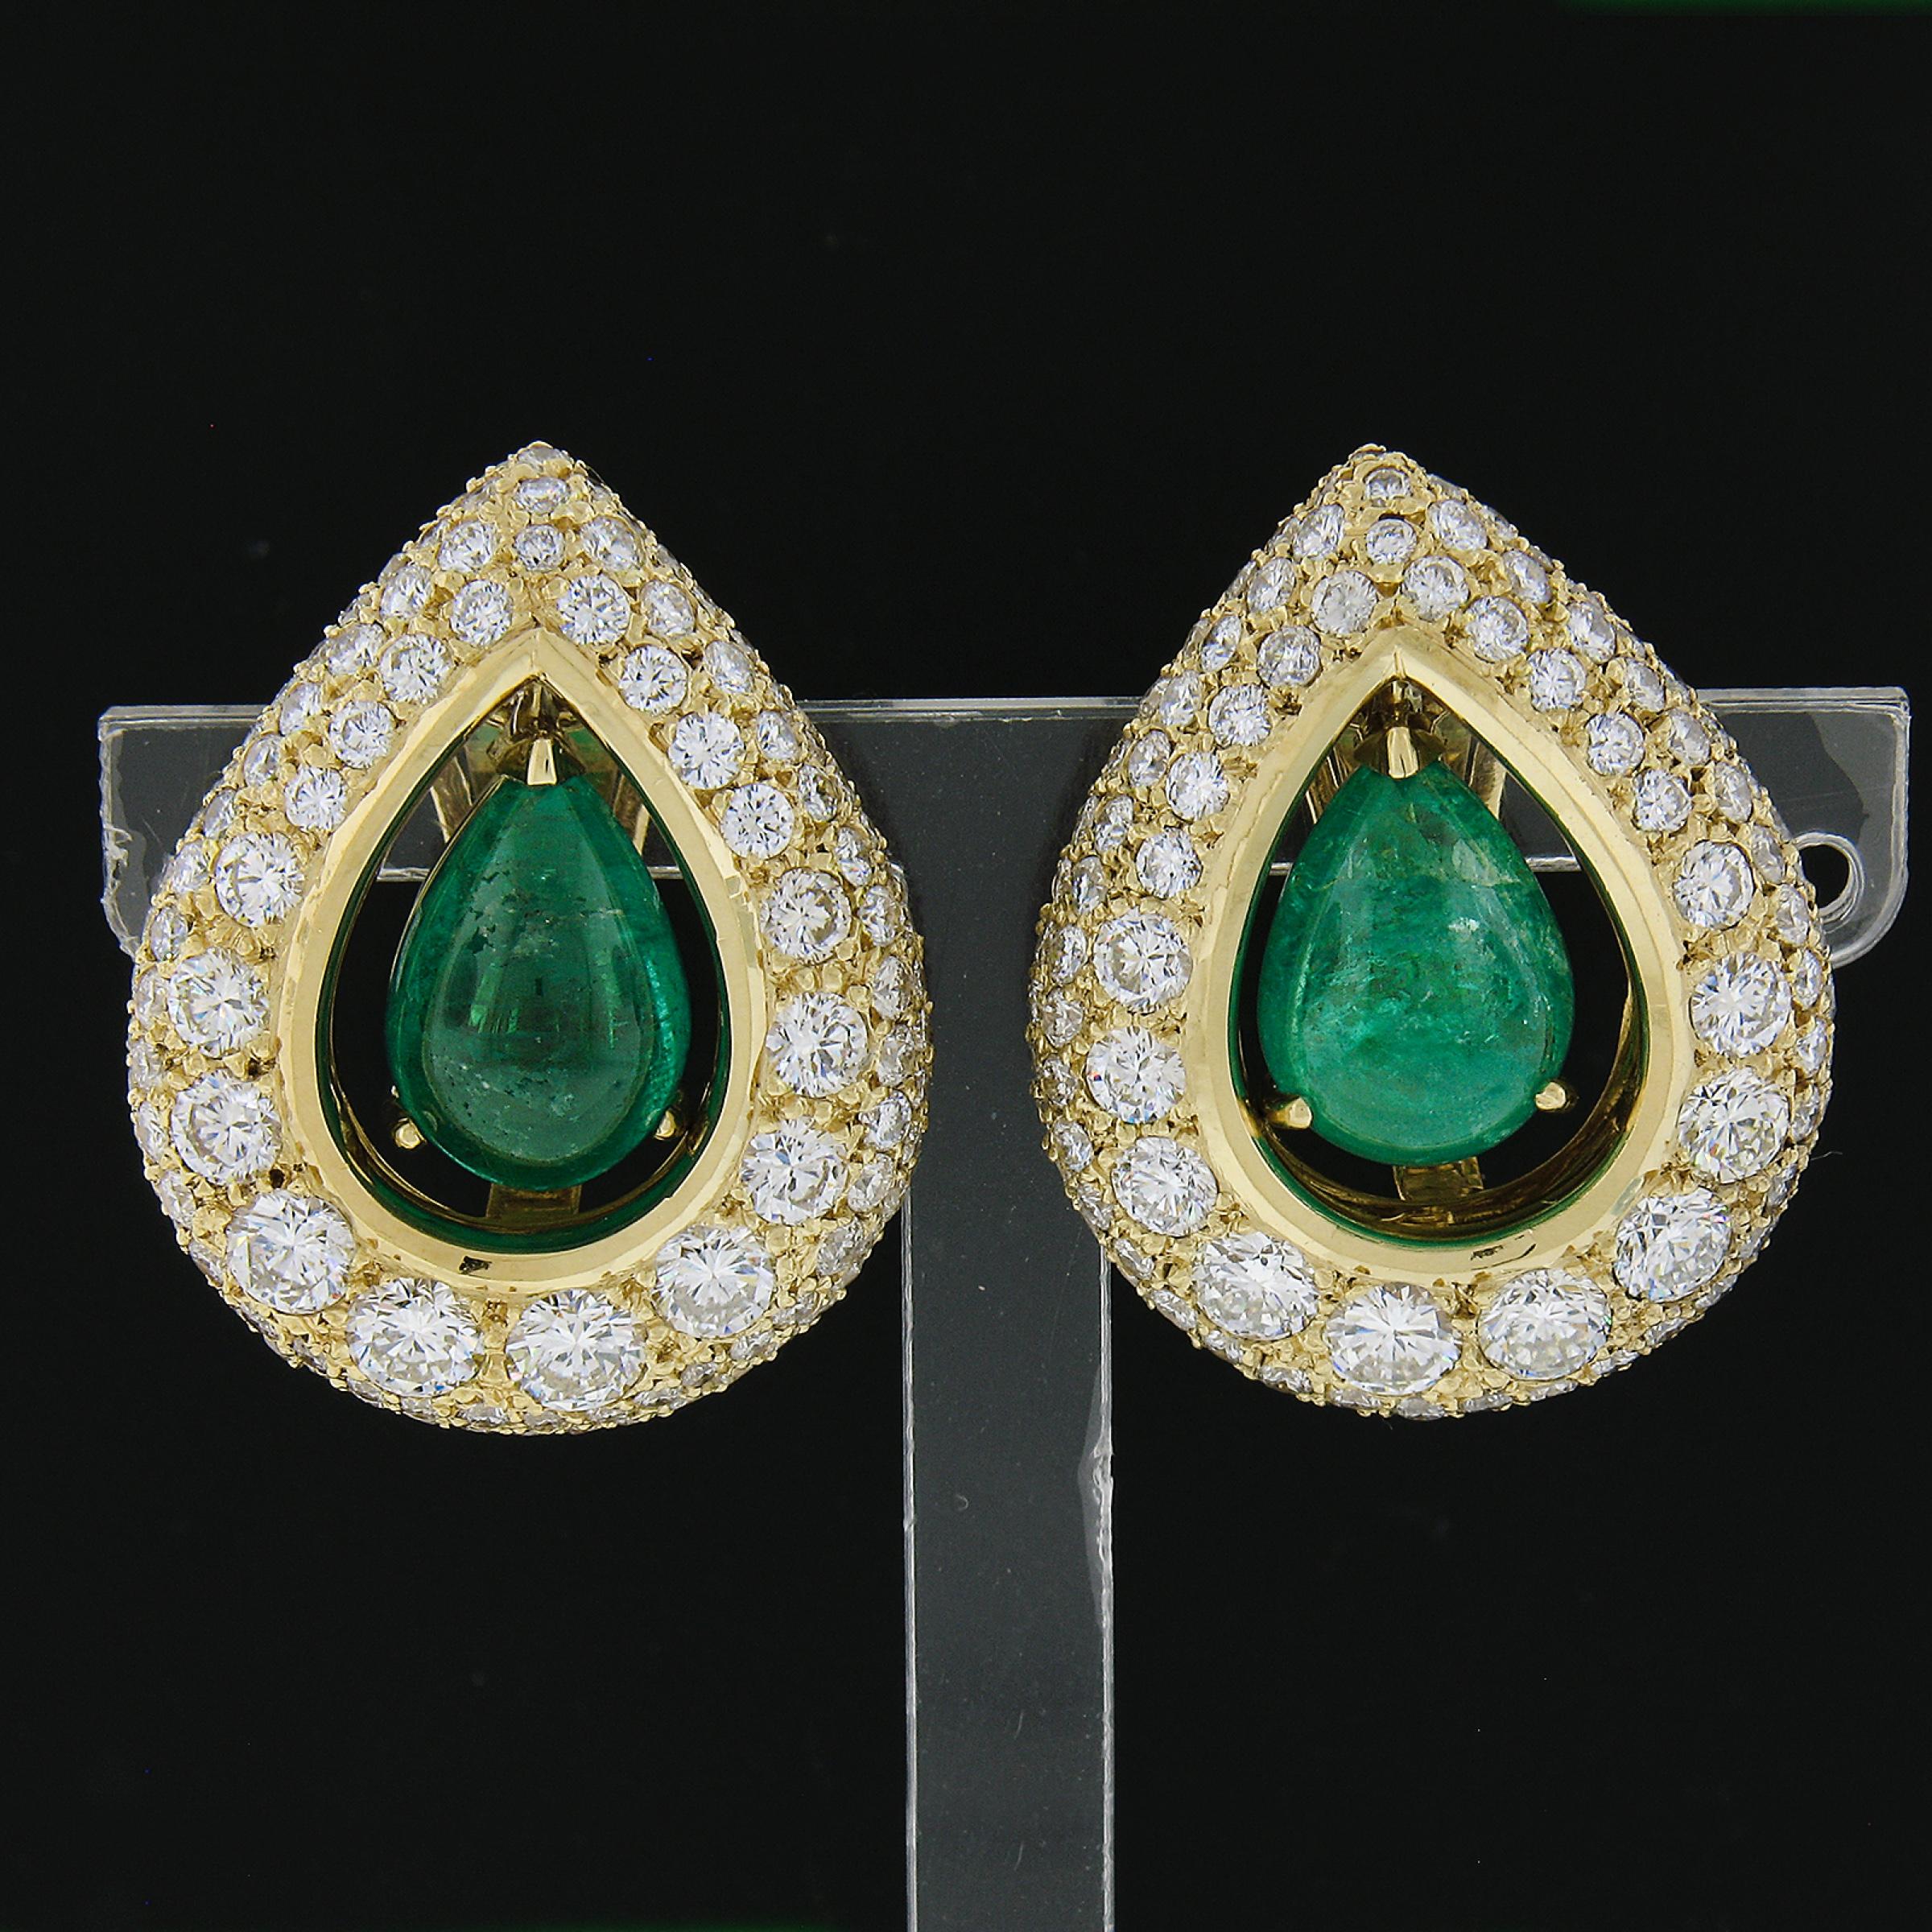 --Stones:--
2 Natural Genuine Emeralds - Pear Cabochon Cut - Prong Set - Vibrant Green Color - 8ctw approx.
** See Certification Details Below for Complete Info **
312 Natural Genuine Diamonds - Round Brilliant Cut - Pave Set - G-I Color - VS2-SI2